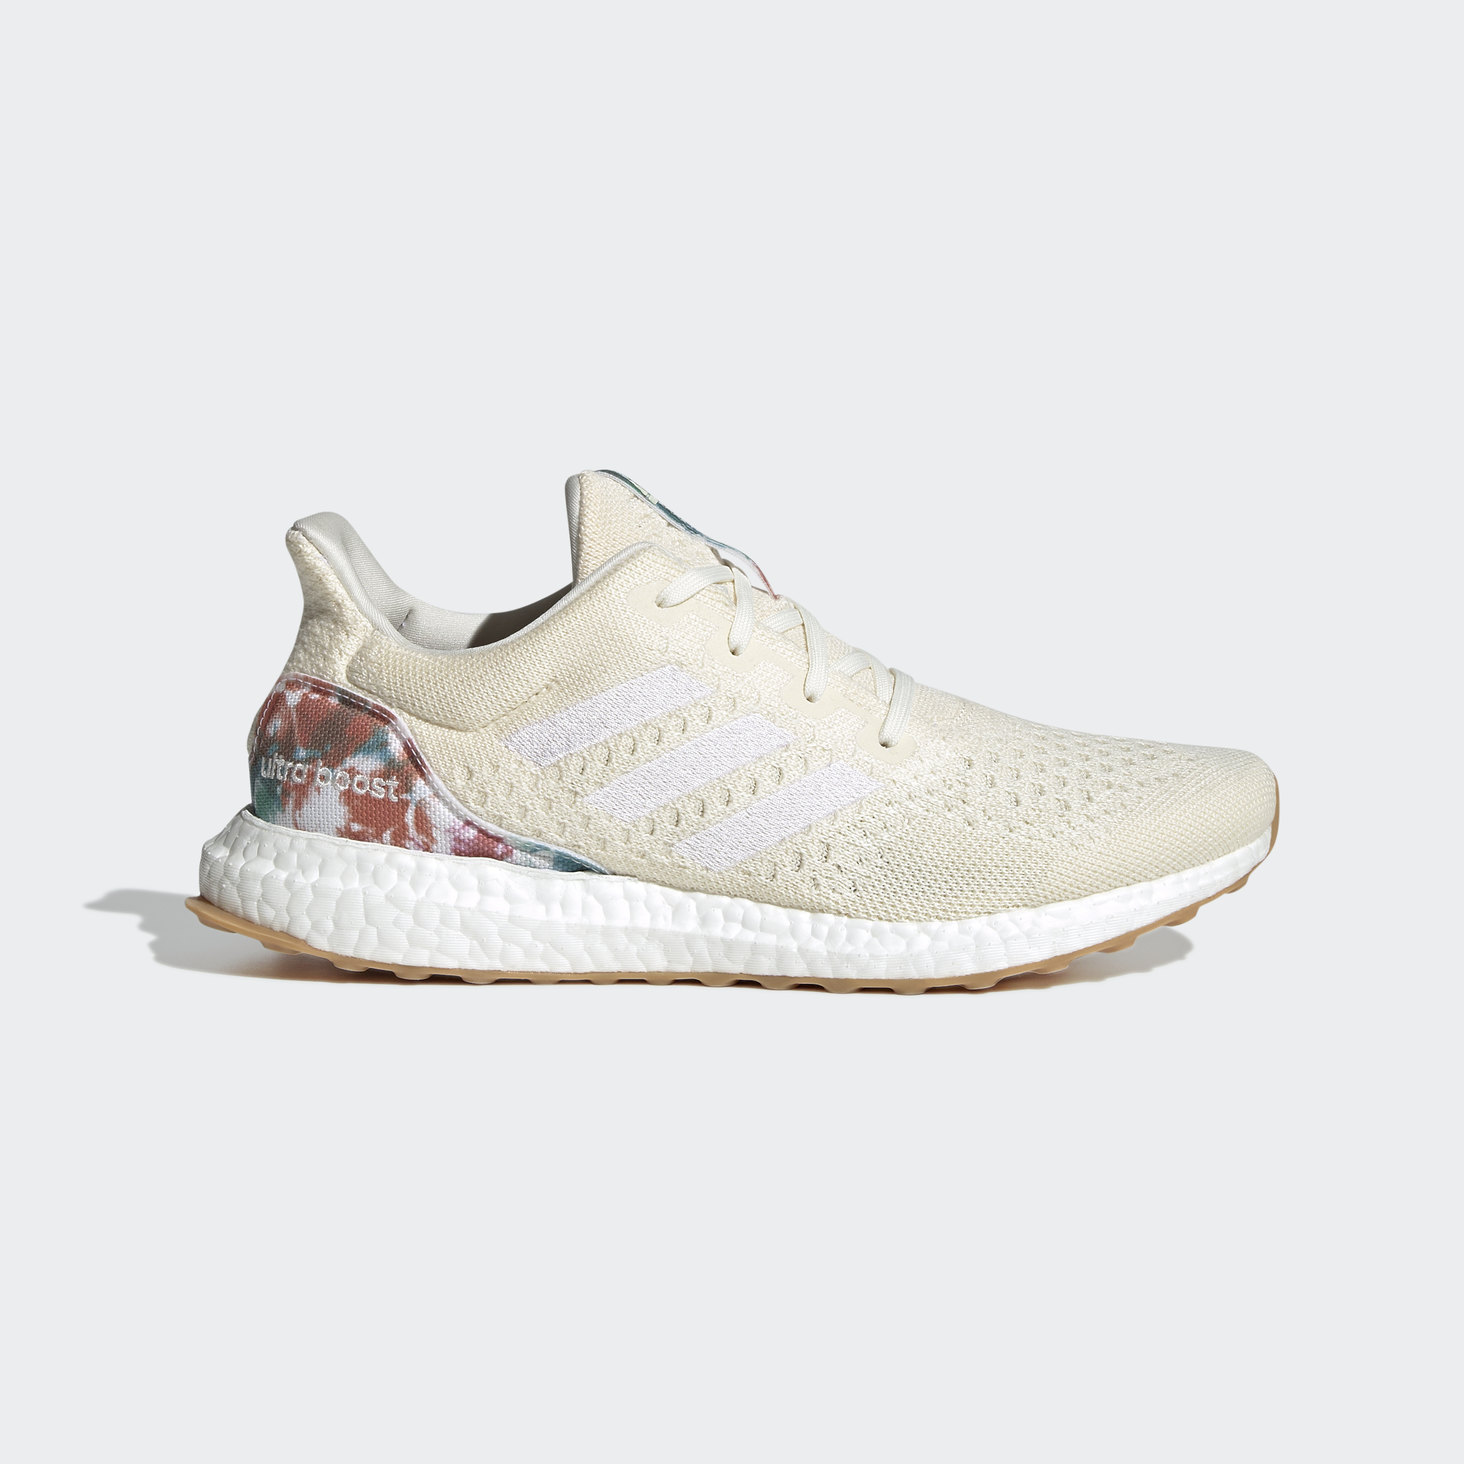 Ultraboost Uncaged LAB Shoes | adidas